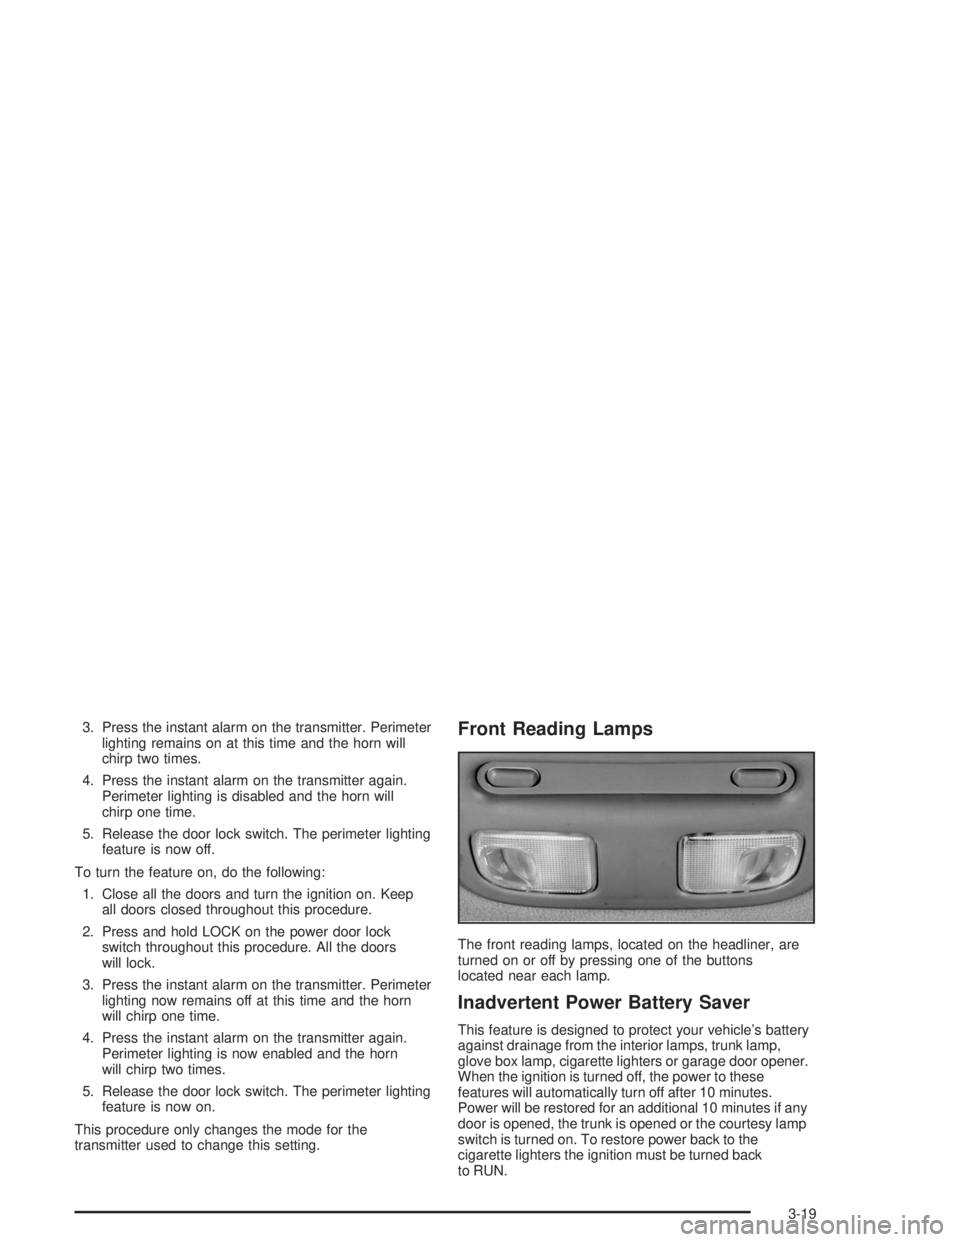 BUICK LESABRE 2004 Owners Guide 3. Press the instant alarm on the transmitter. Perimeter
lighting remains on at this time and the horn will
chirp two times.
4. Press the instant alarm on the transmitter again.
Perimeter lighting is 